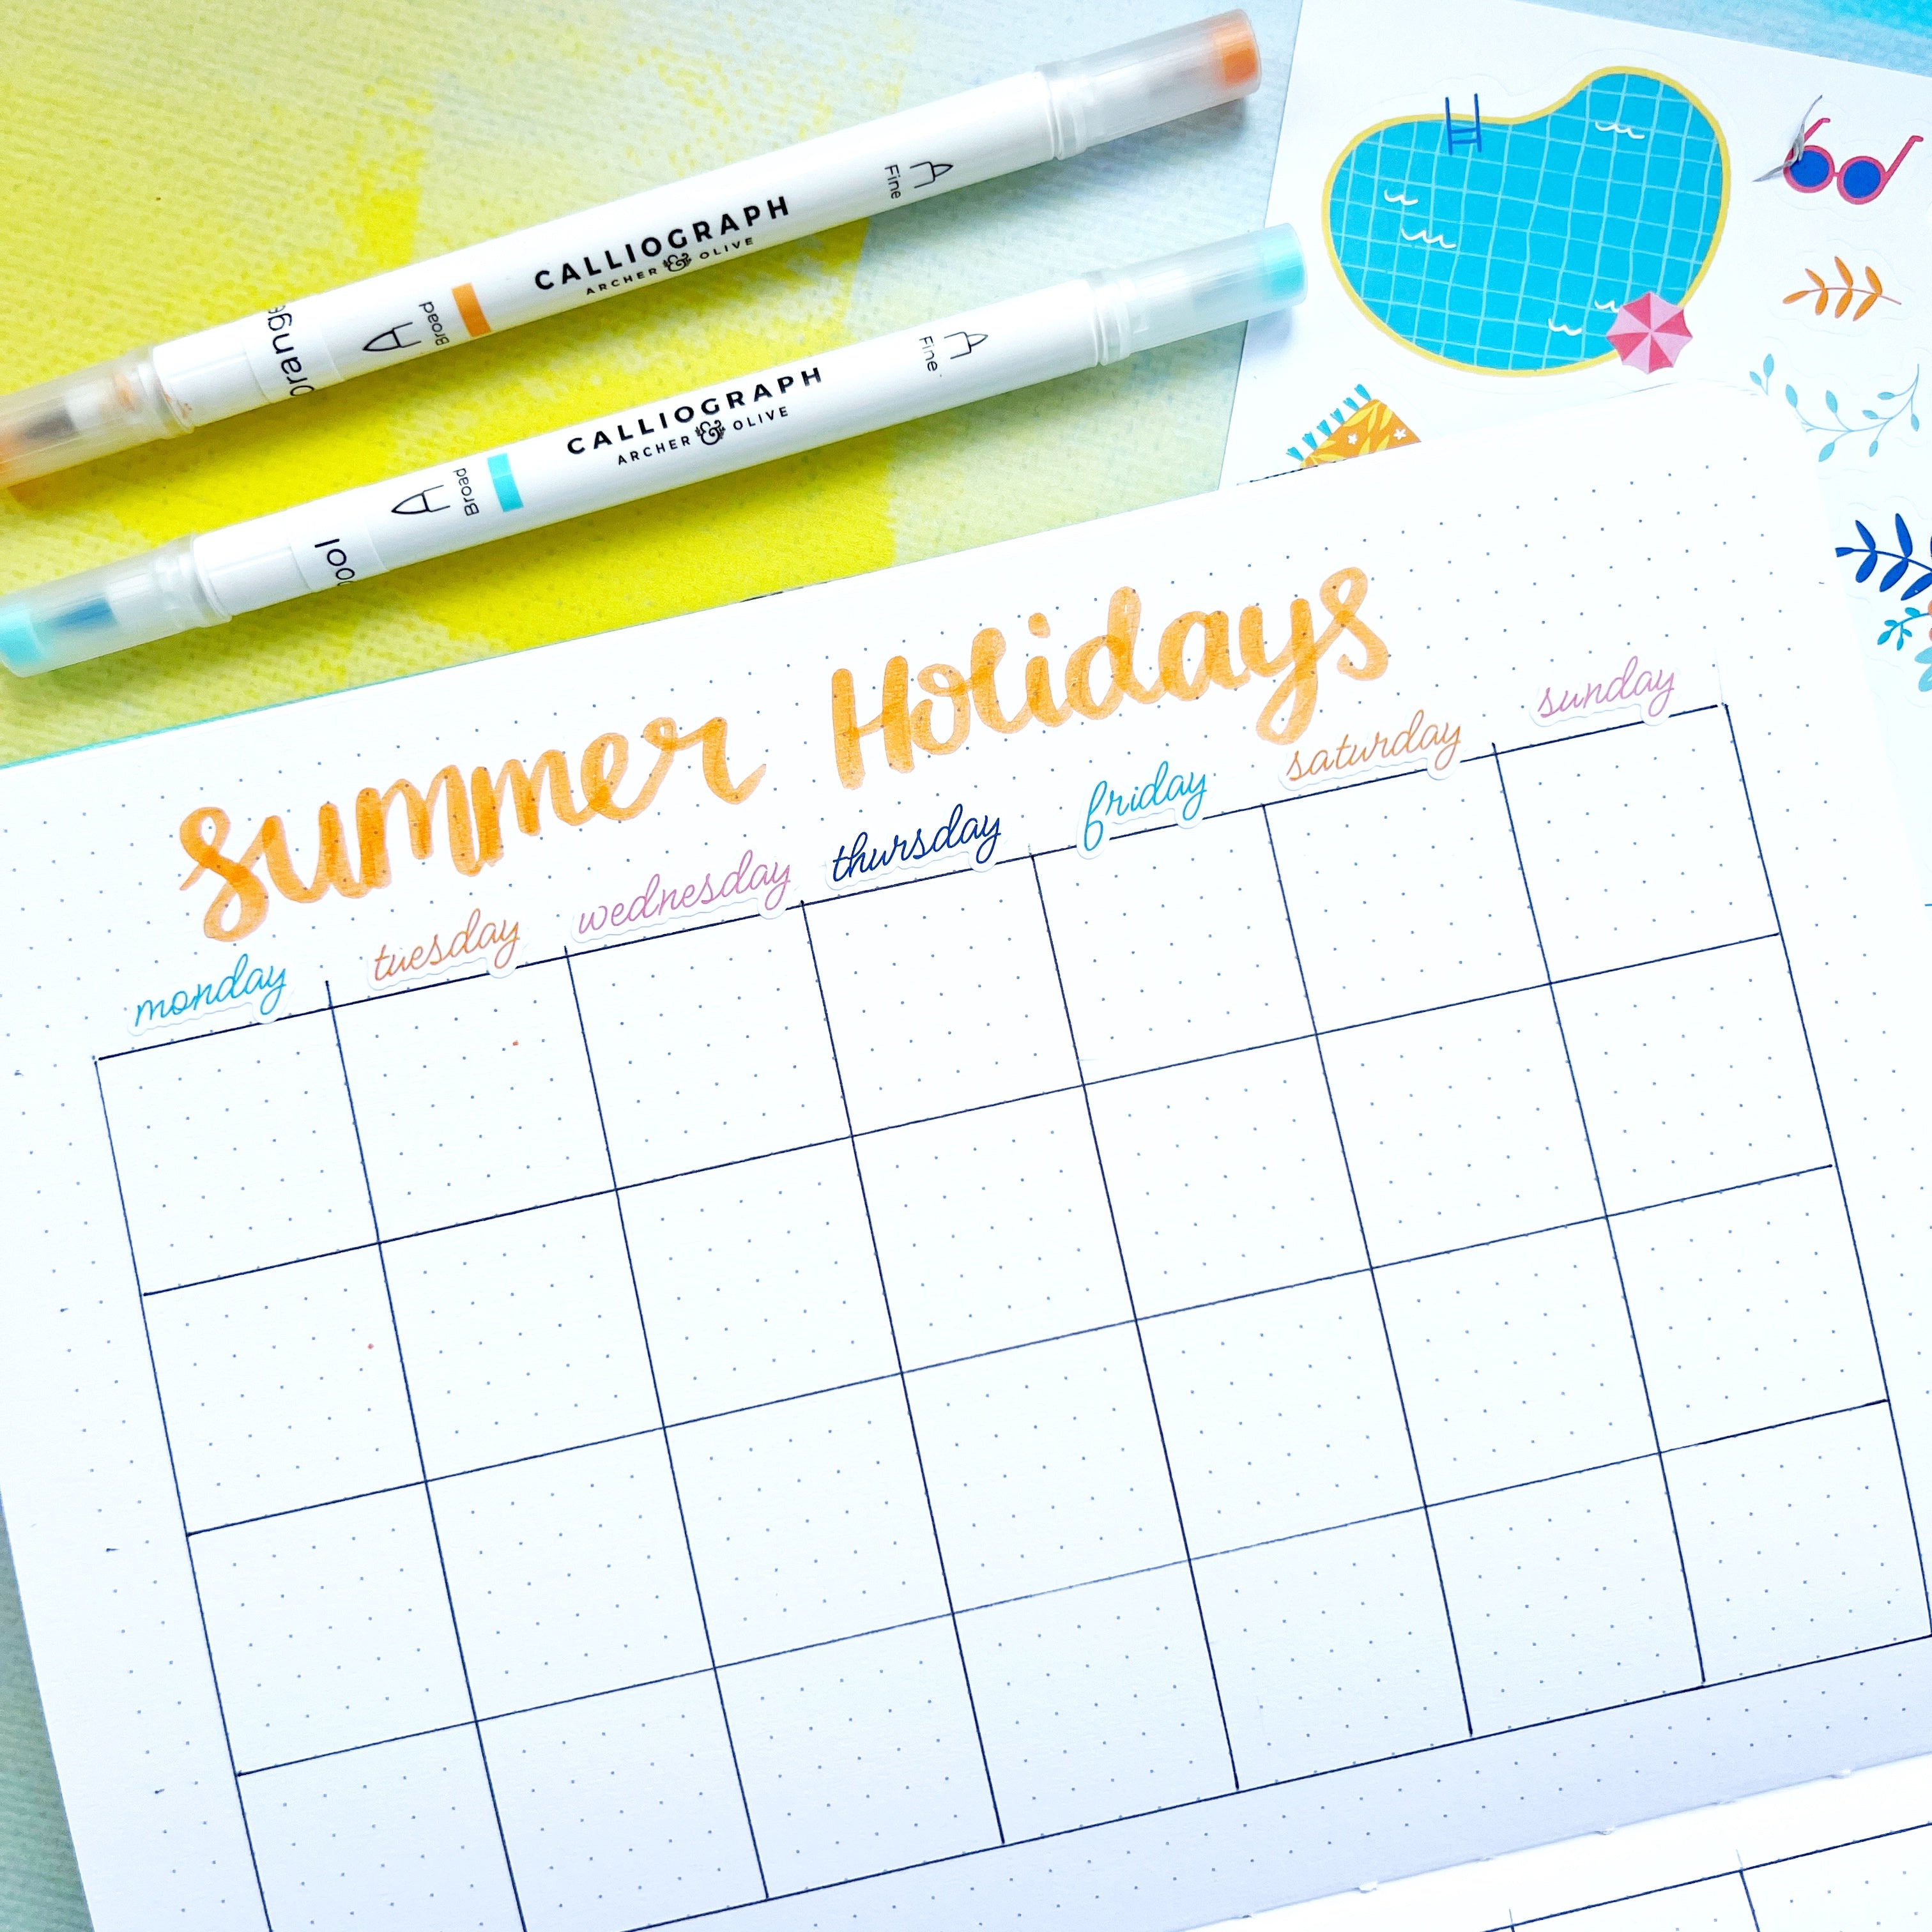 Summer Holidays title above grid layout